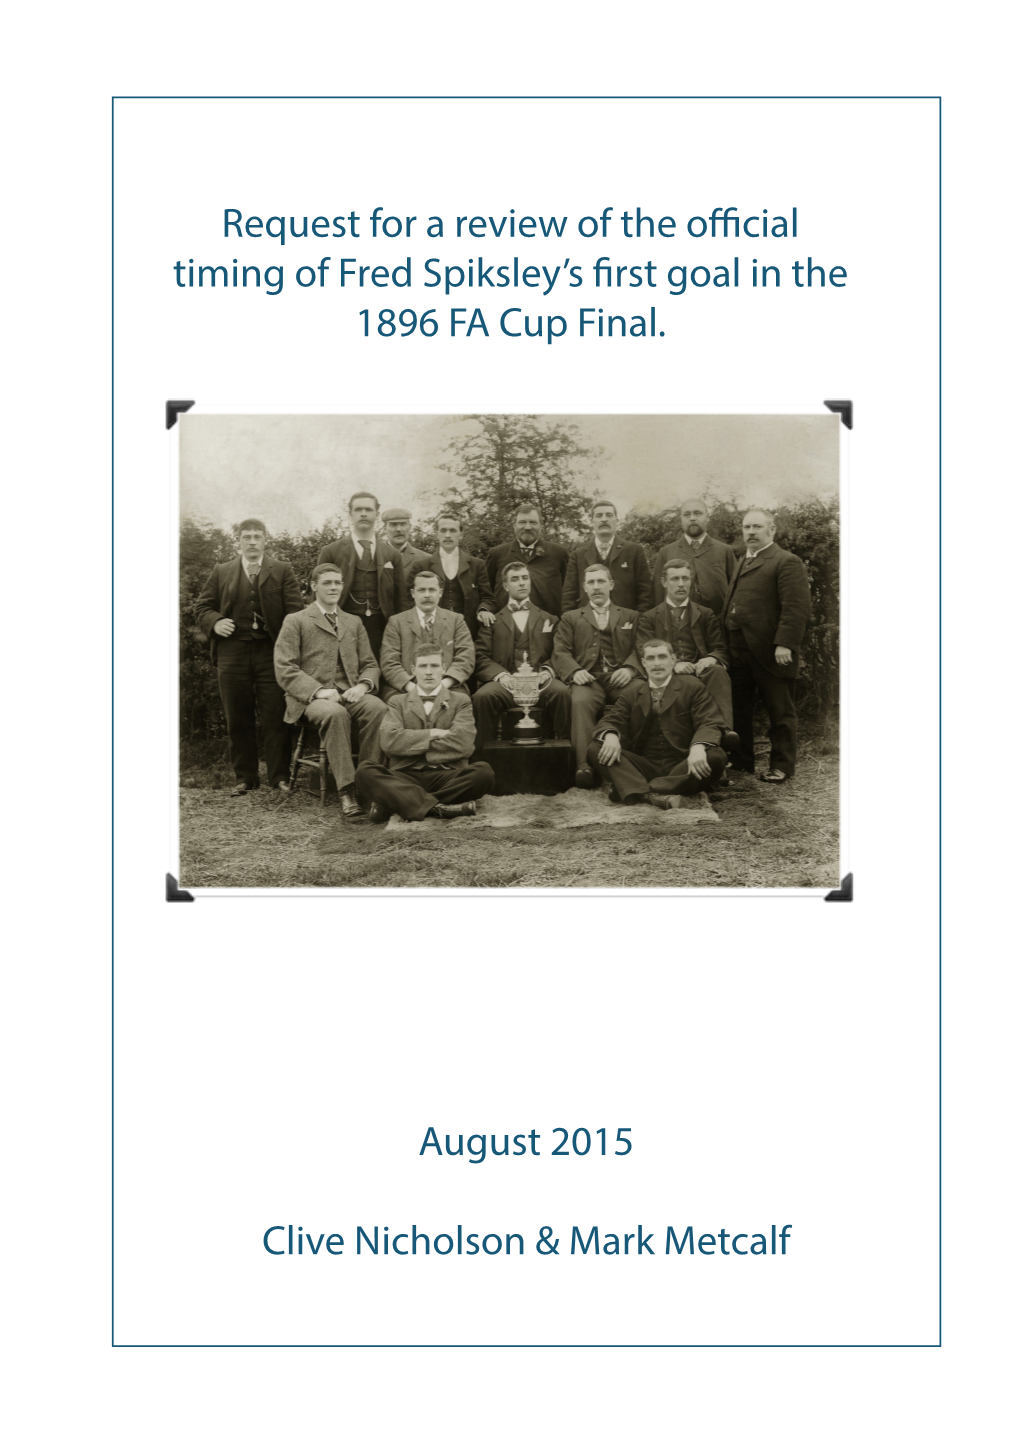 Request for a Review of the Official Timing of Fred Spiksley's First Goal In